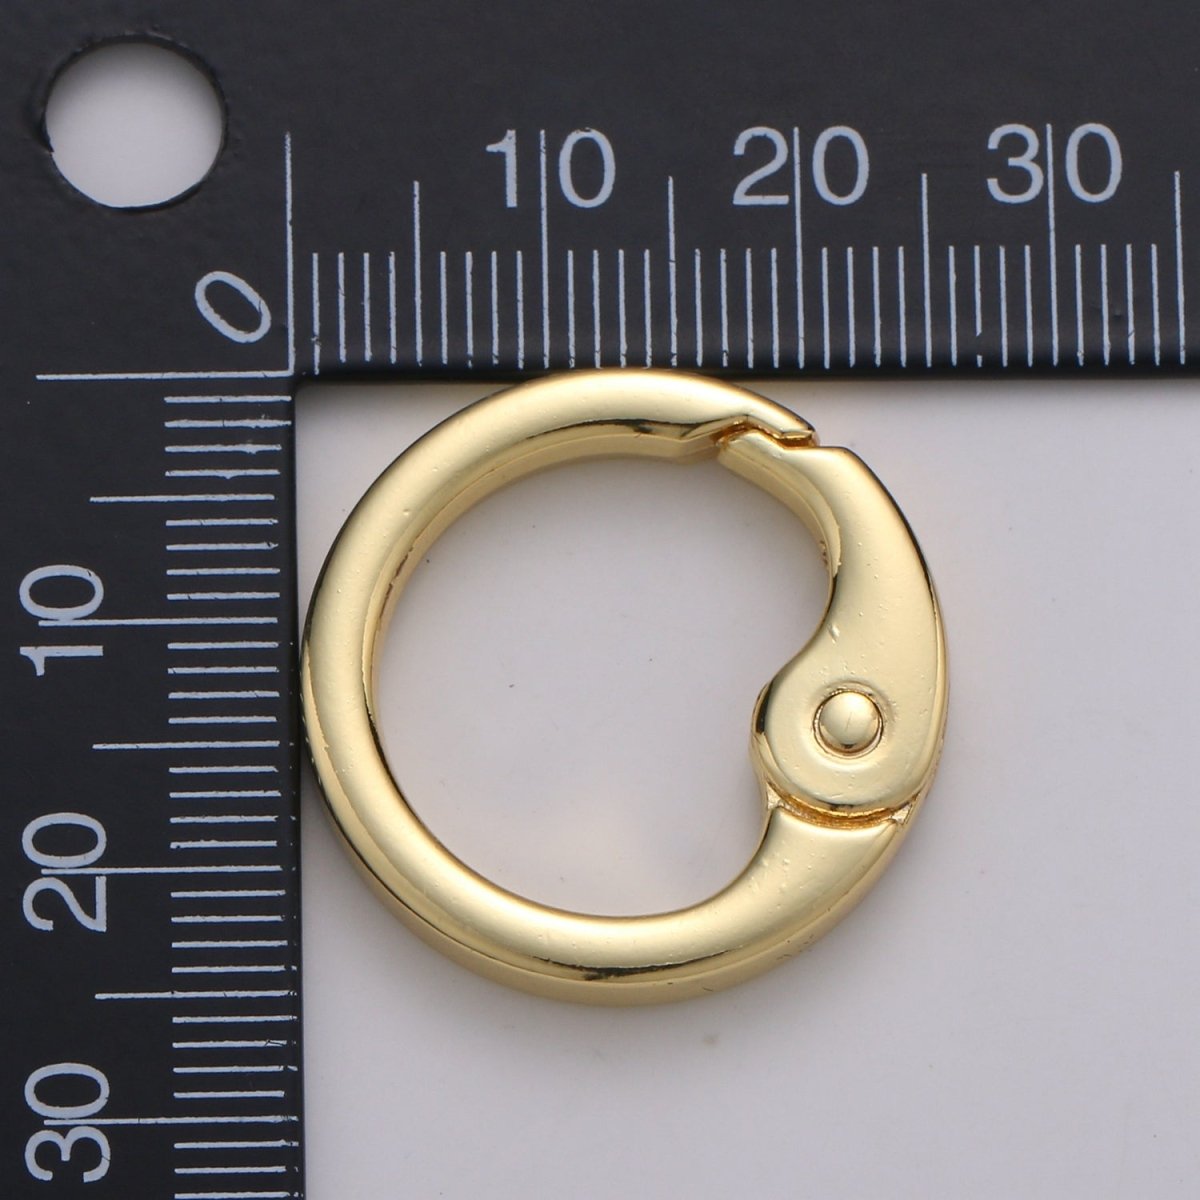 Chunky Gold Spring Gate Ring, Push Gate ring, 24mm Round Clasp Charm Holder 24K Gold Filled Clasp for Link Chain Connector Supp-990 L-040 L-041 - DLUXCA